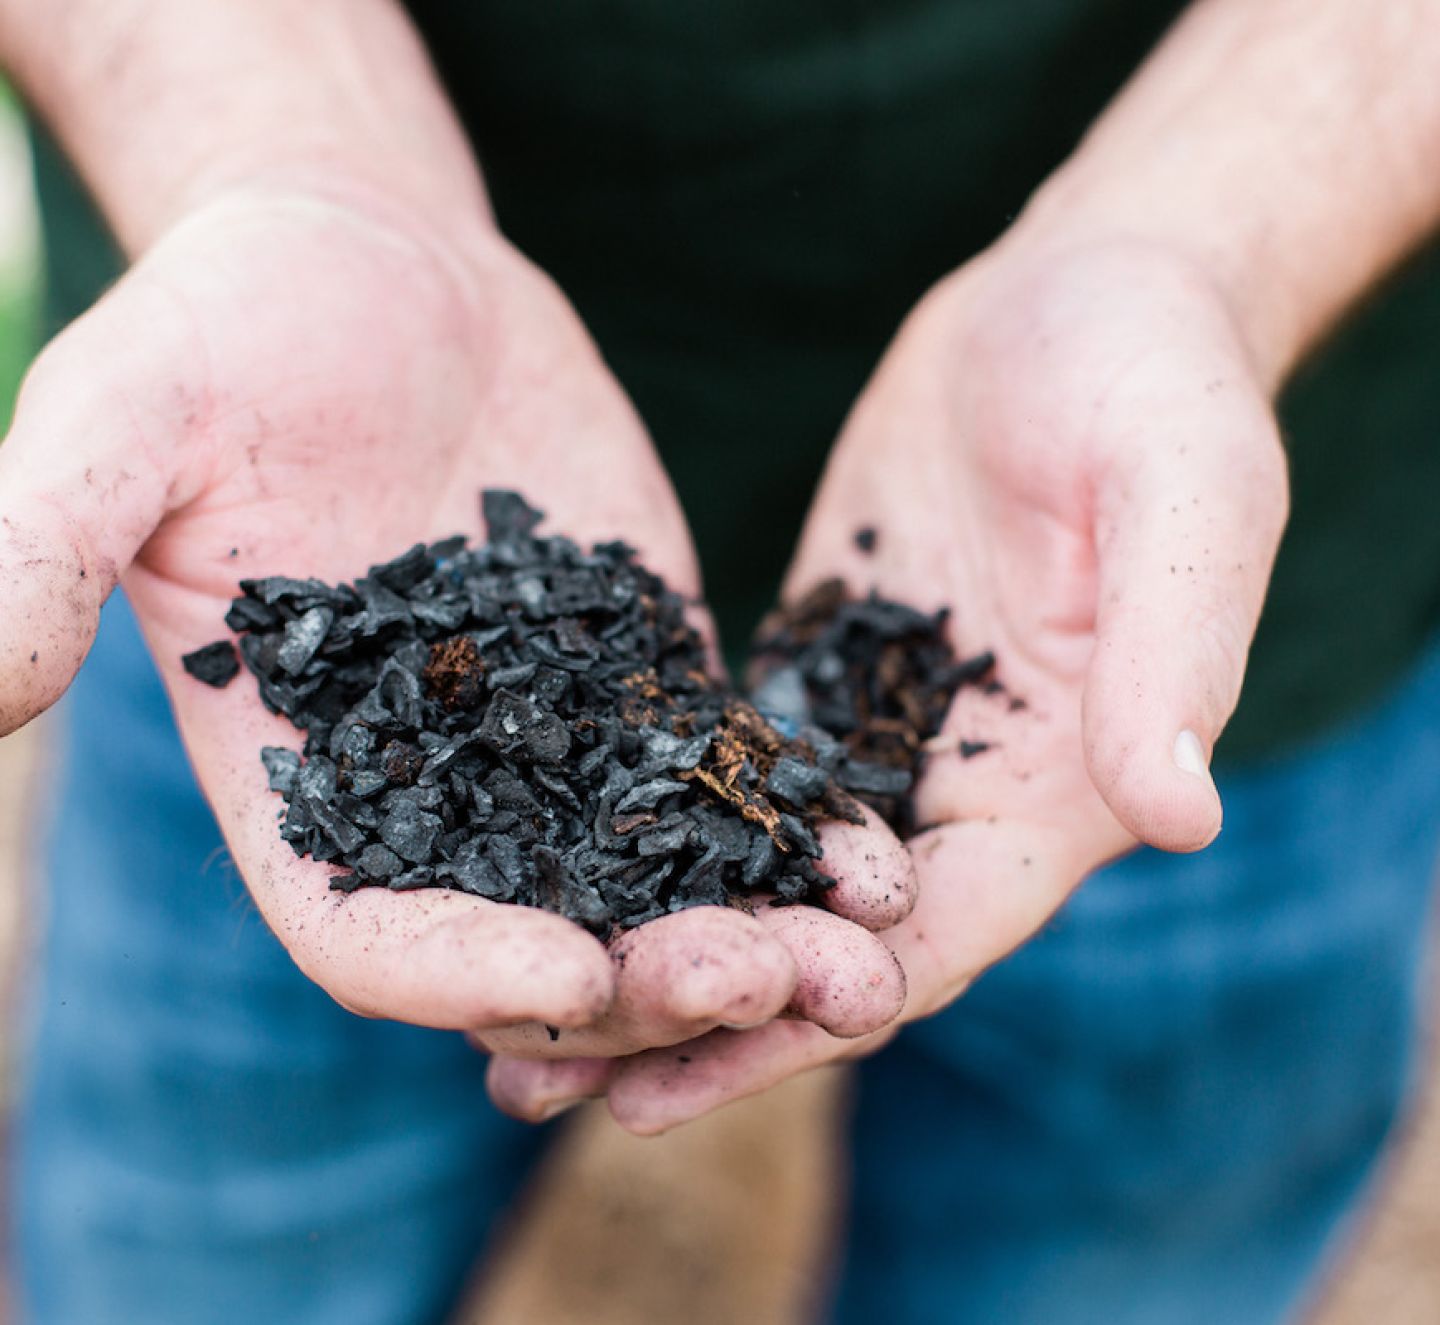 Removing carbon with biochar: how you can get involved in a cutting-edge removal project